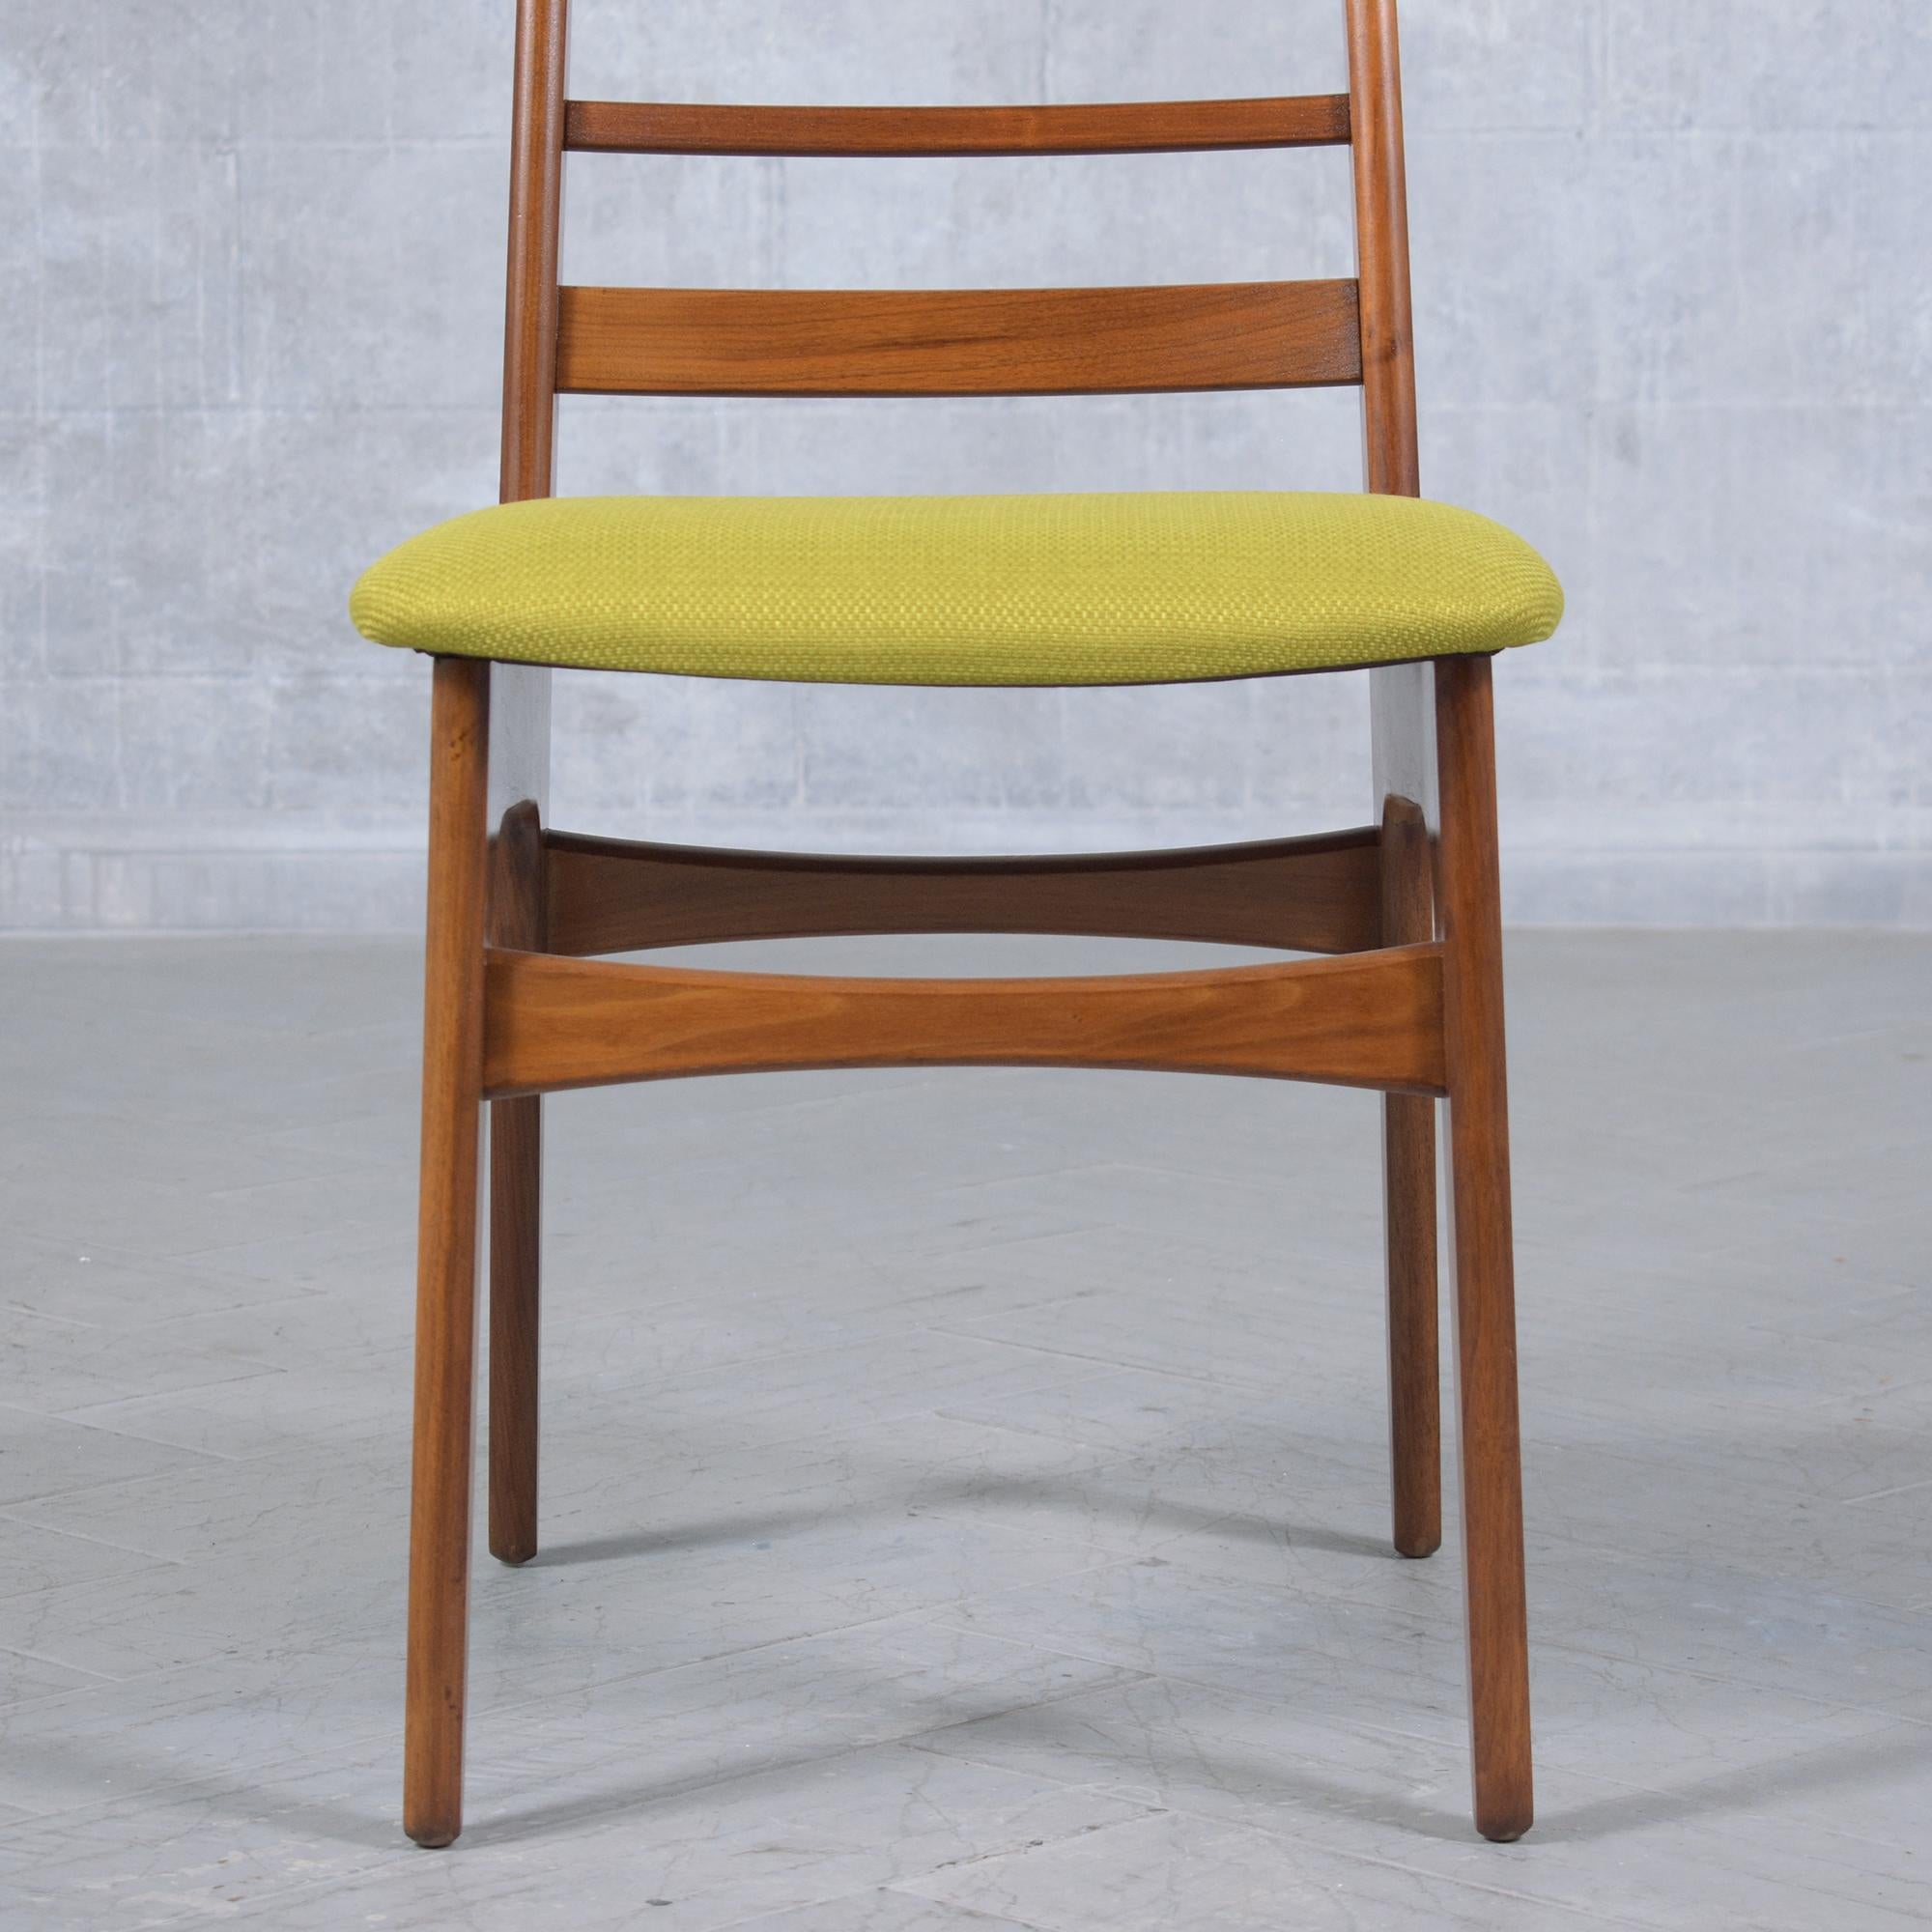 1960s Danish Modern Teak Chair in Walnut Finish with Green Fabric Upholstery For Sale 3